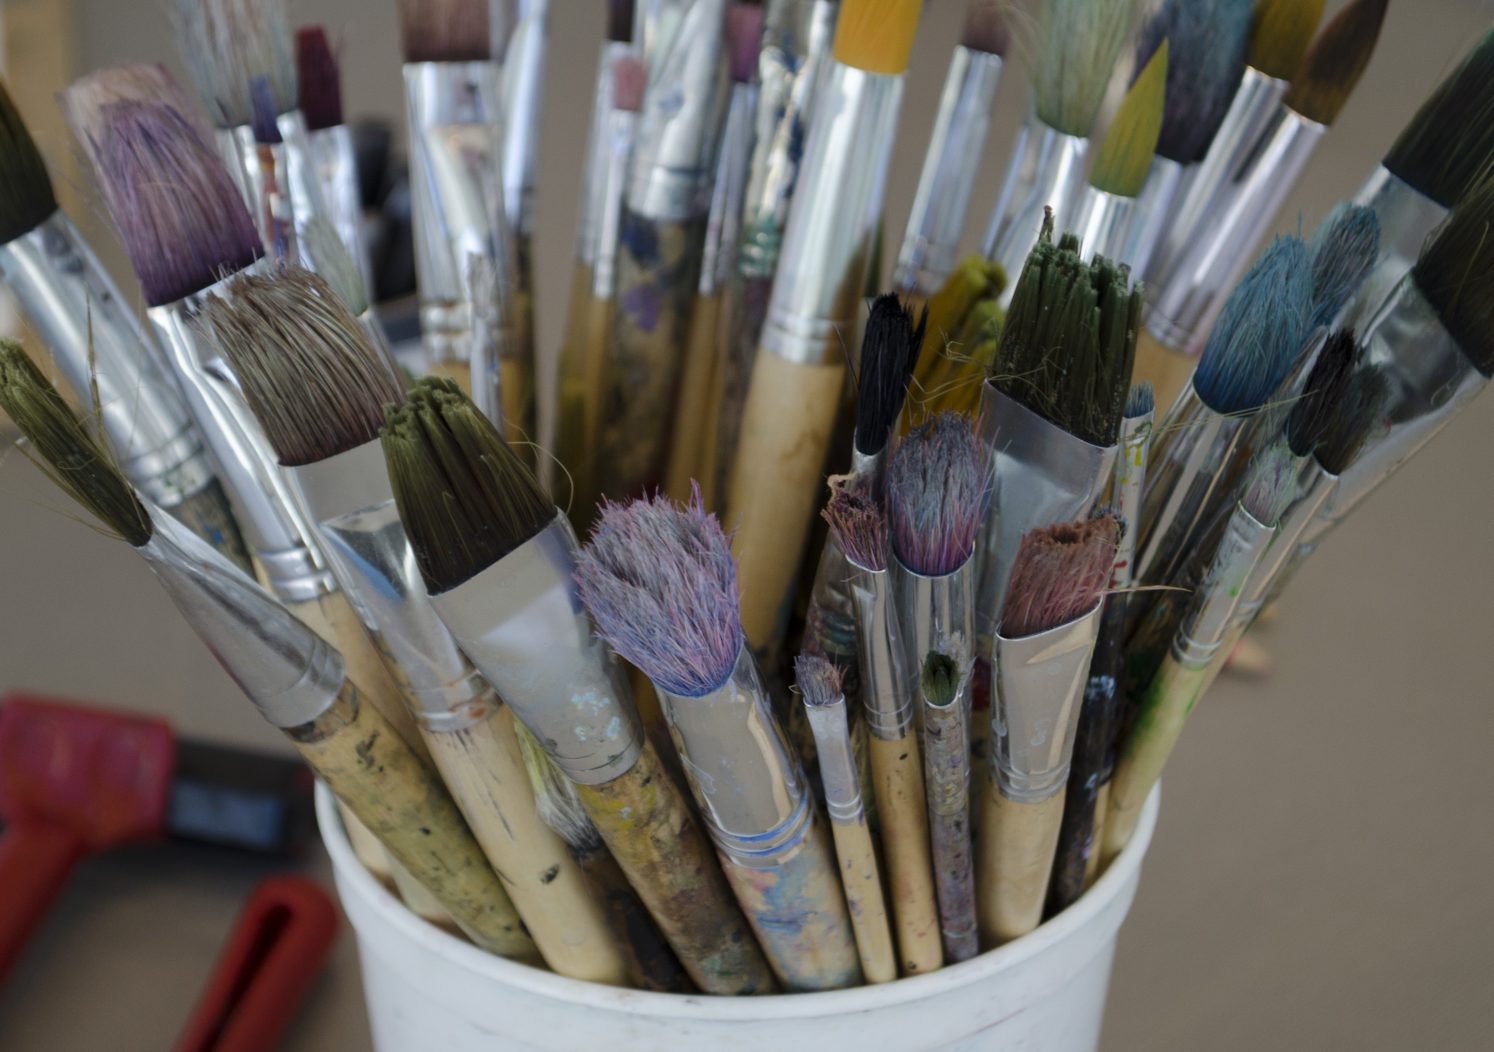 close-up photo of paintbrushes in a cup